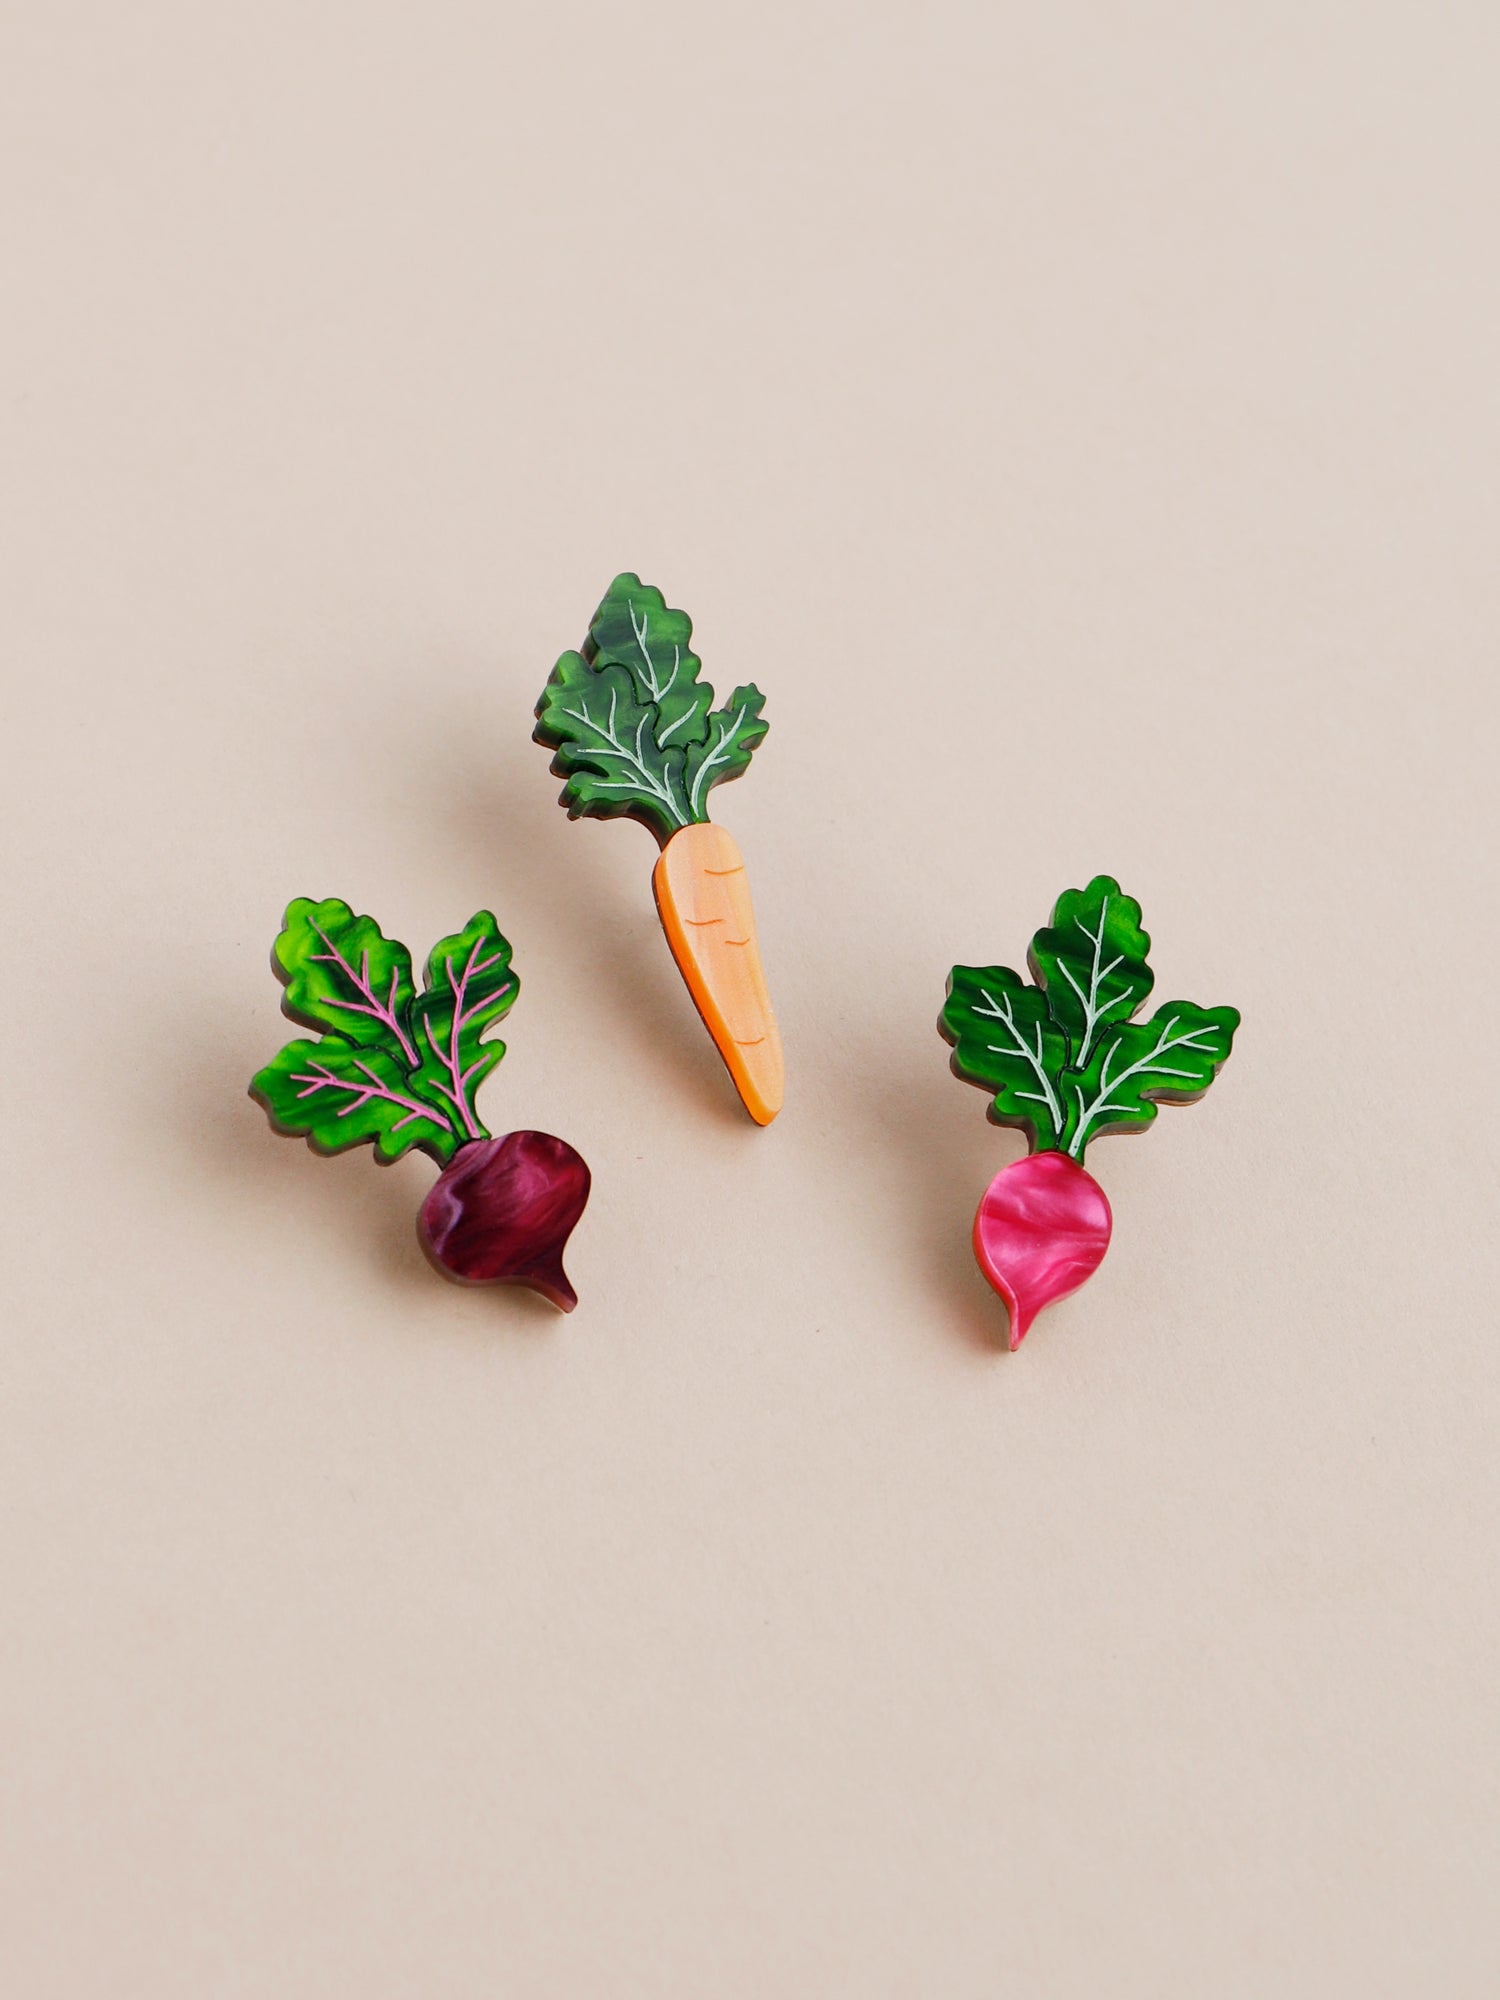 Pin set including our mini carrot, beetroot and radish vegetables. Made with acrylic and our FSC approved wood backing.   1 x silver tone brooch pin & locking clasps. Handmade in London by Wolf & Moon.